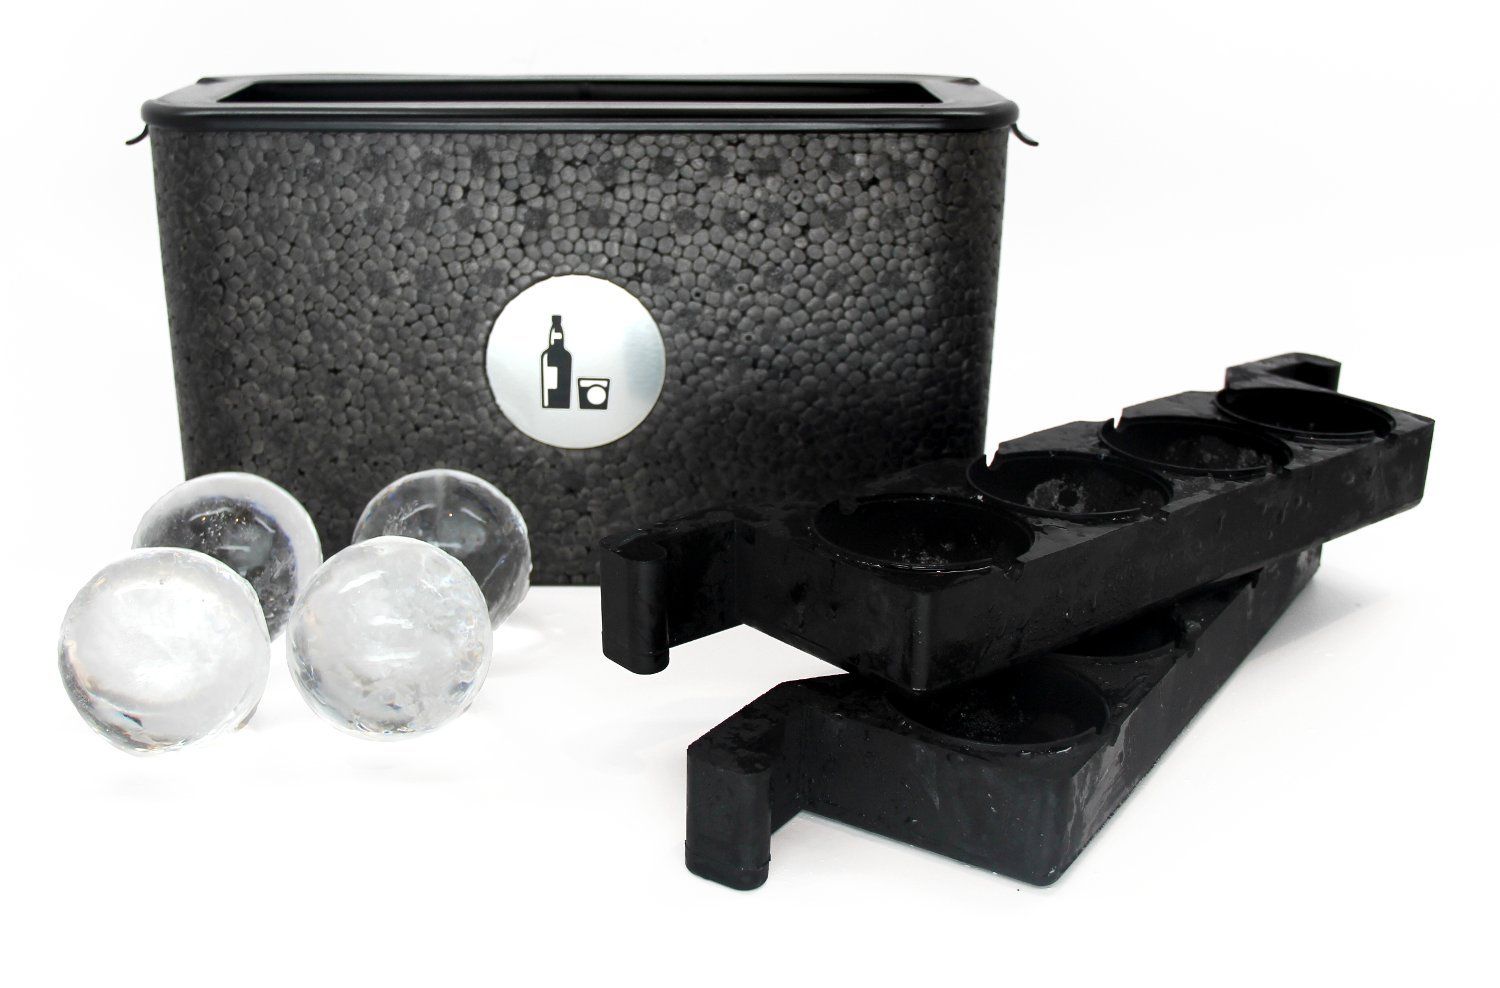 Crystal-clear ice ball maker for the home bartender Make 2 perfectly clear, 